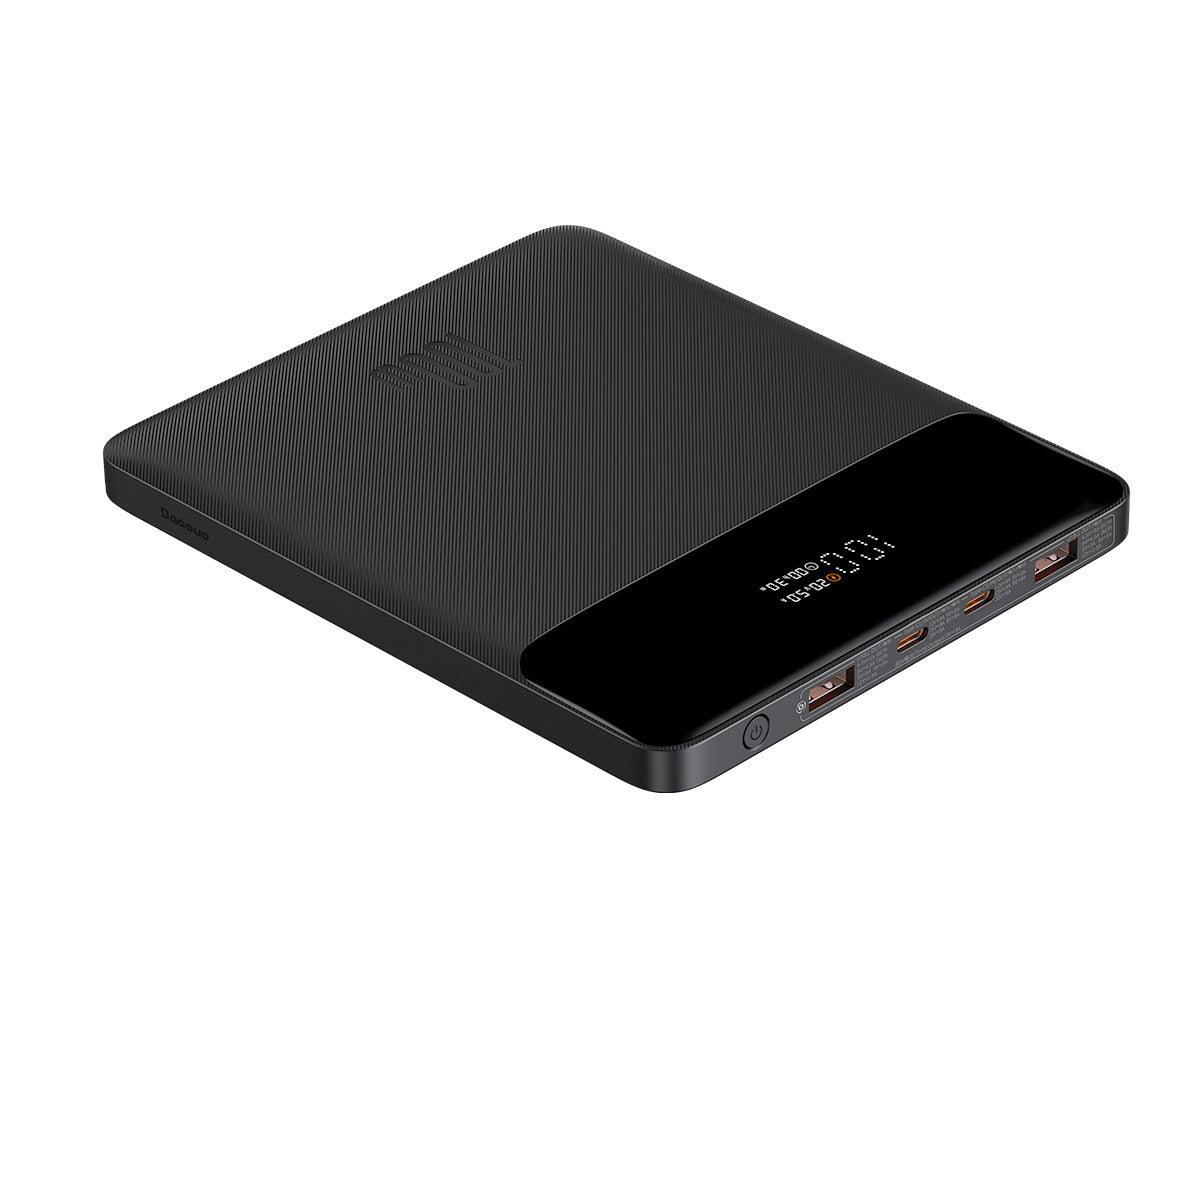 Baseus Blade 100W Power Bank, hands on: A versatile and portable charger  for multiple devices